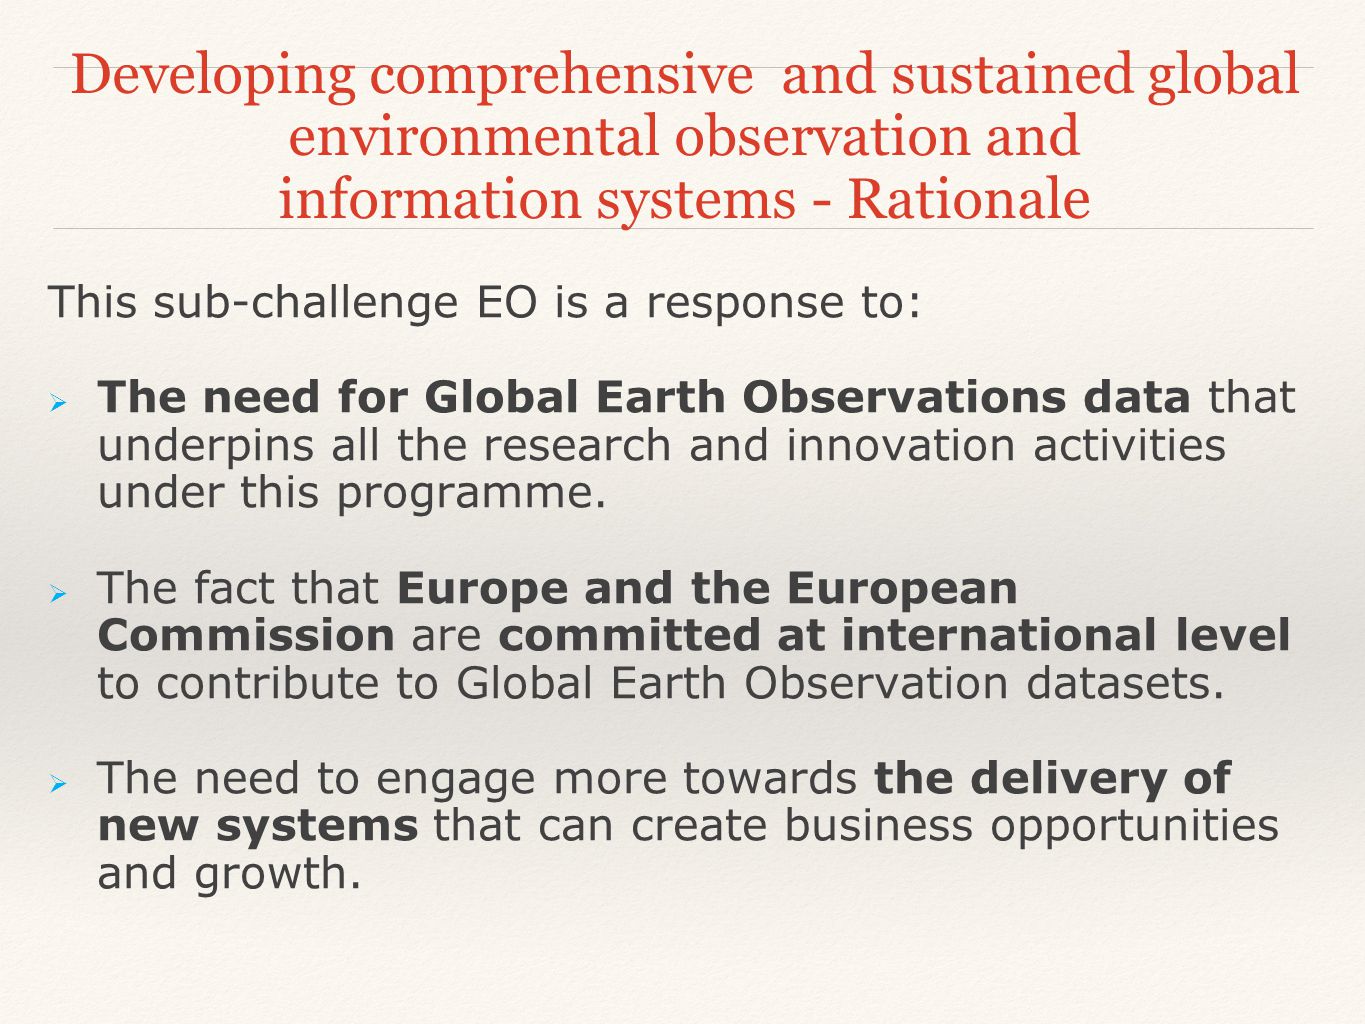 Developing comprehensive and sustained global environmental observation and information systems - Rational e This sub-challenge EO is a response to:  The need for Global Earth Observations data that underpins all the research and innovation activities under this programme.